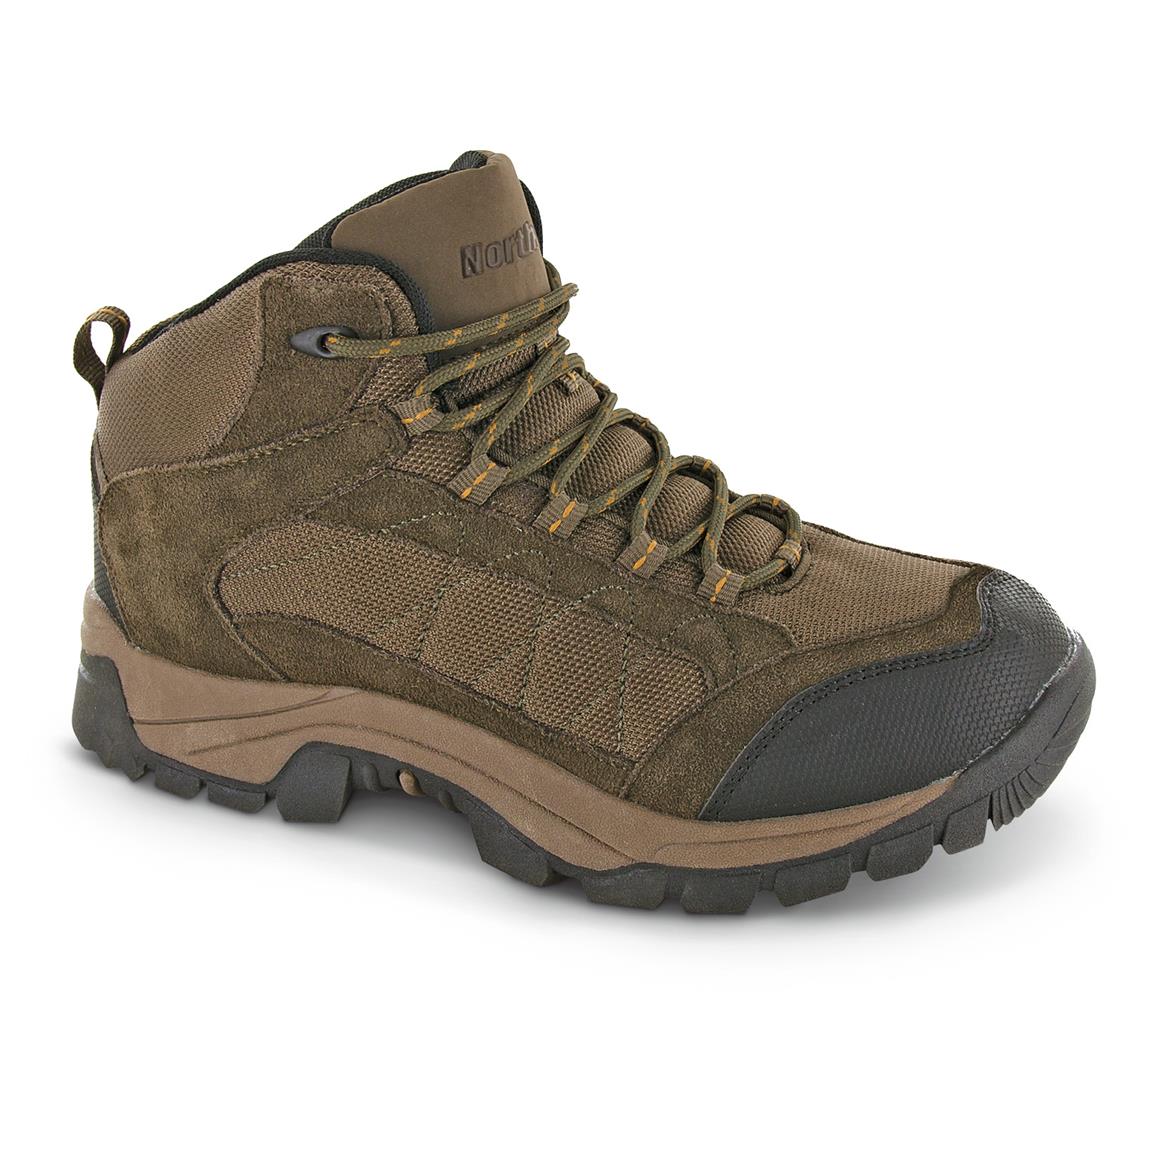 Northside Men's Weston Mid Hiking Boots - 656508, Hiking Boots & Shoes ...